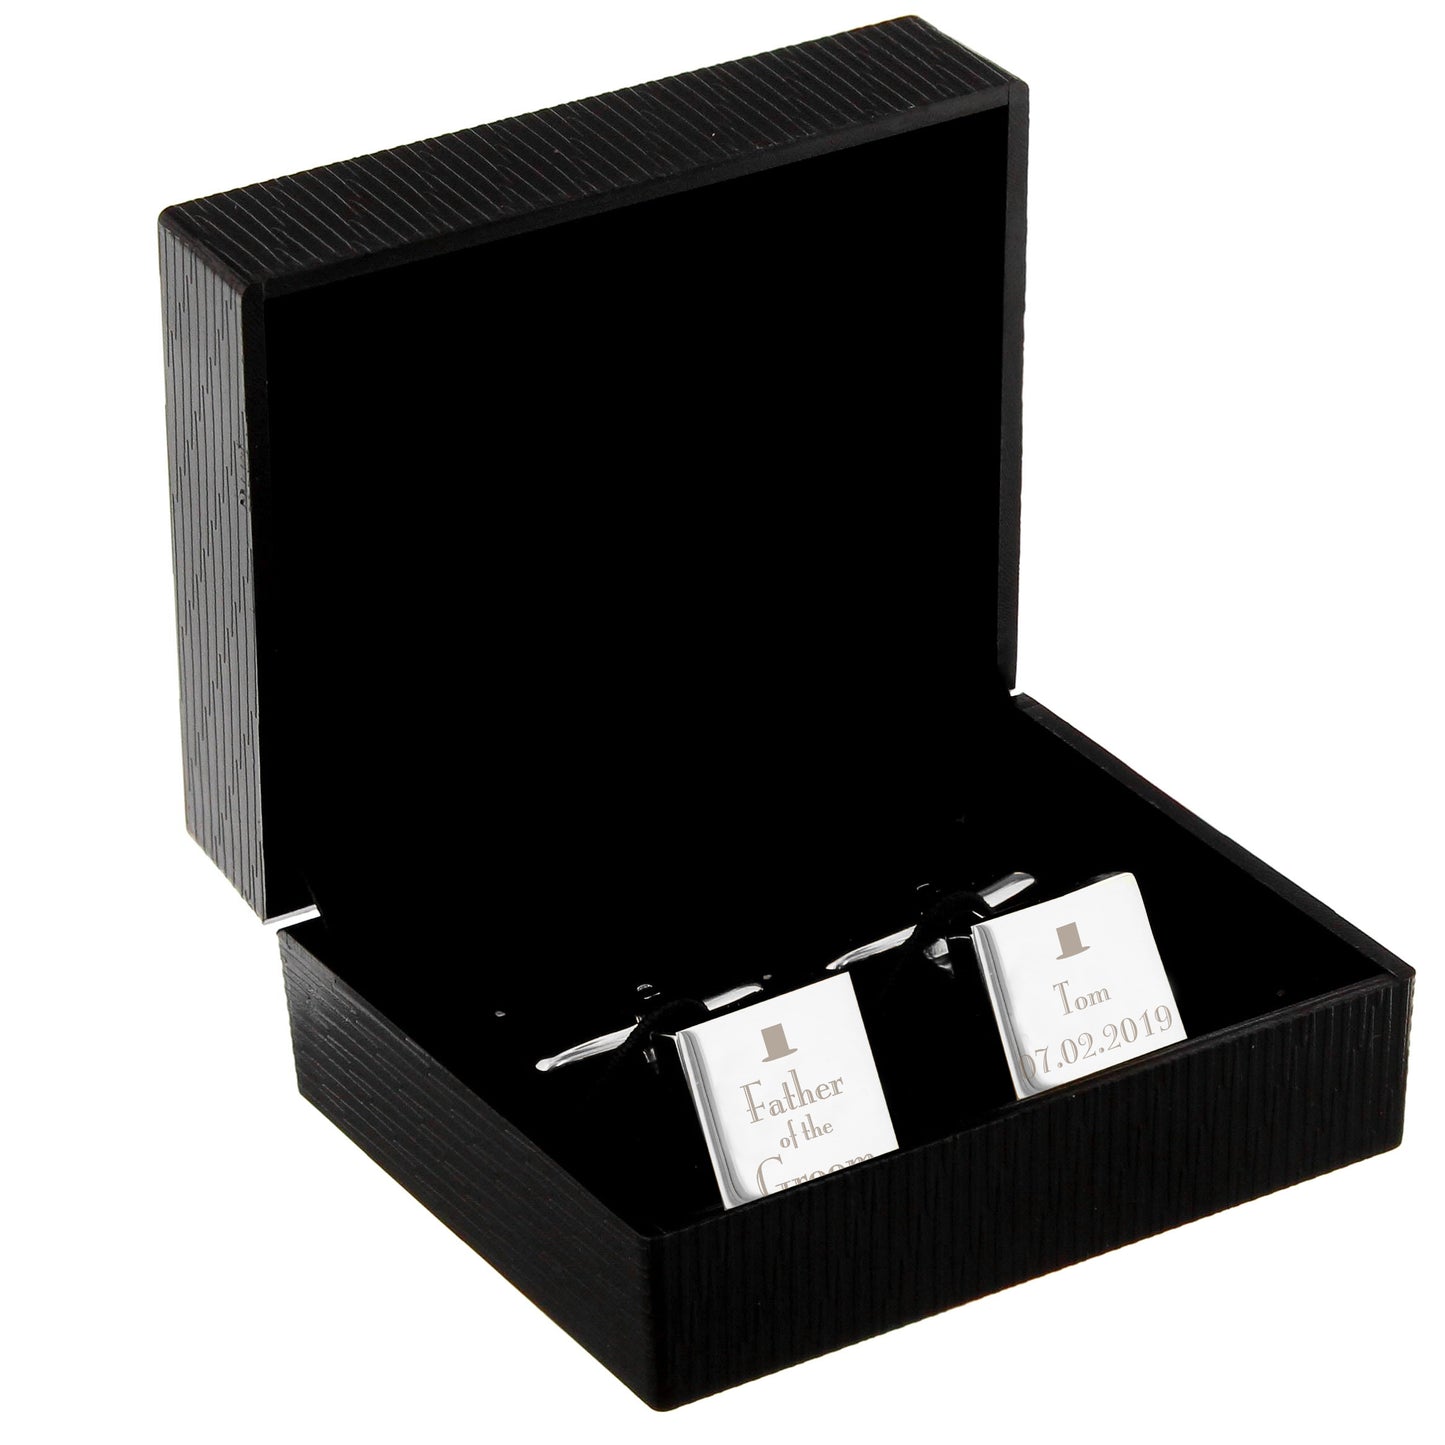 Personalised Decorative Wedding Father of the Groom Square Cufflinks - Personalise It!